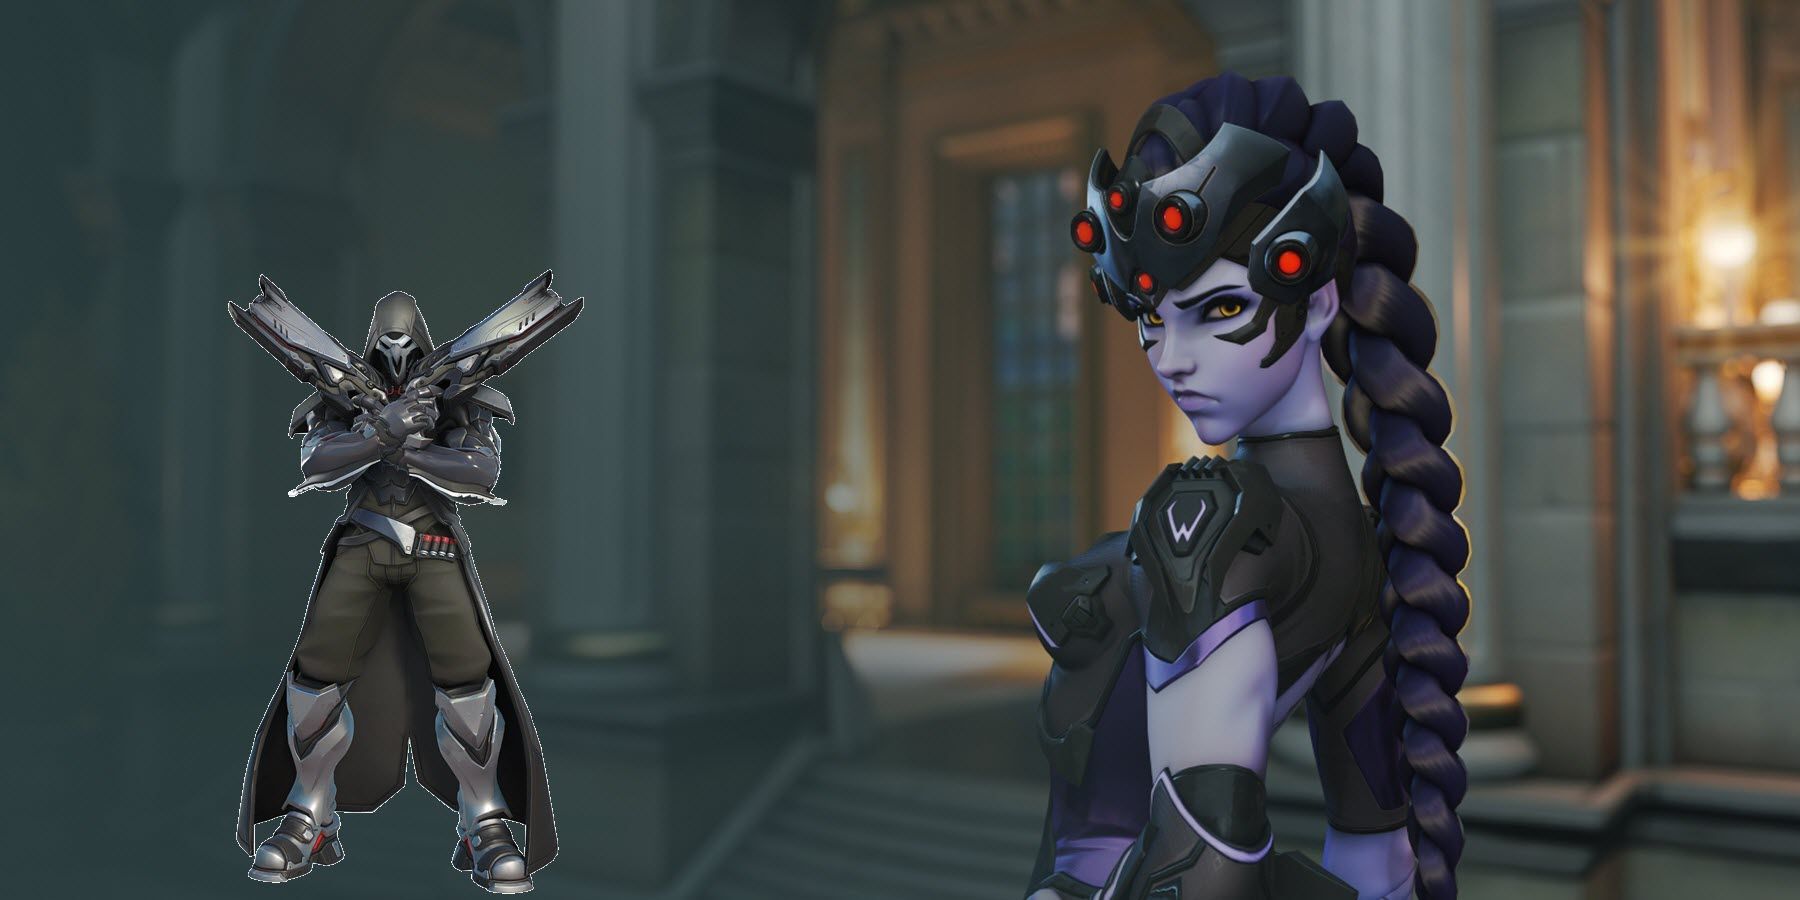 Clever Overwatch sniping spot found for Widowmaker on Blizzard